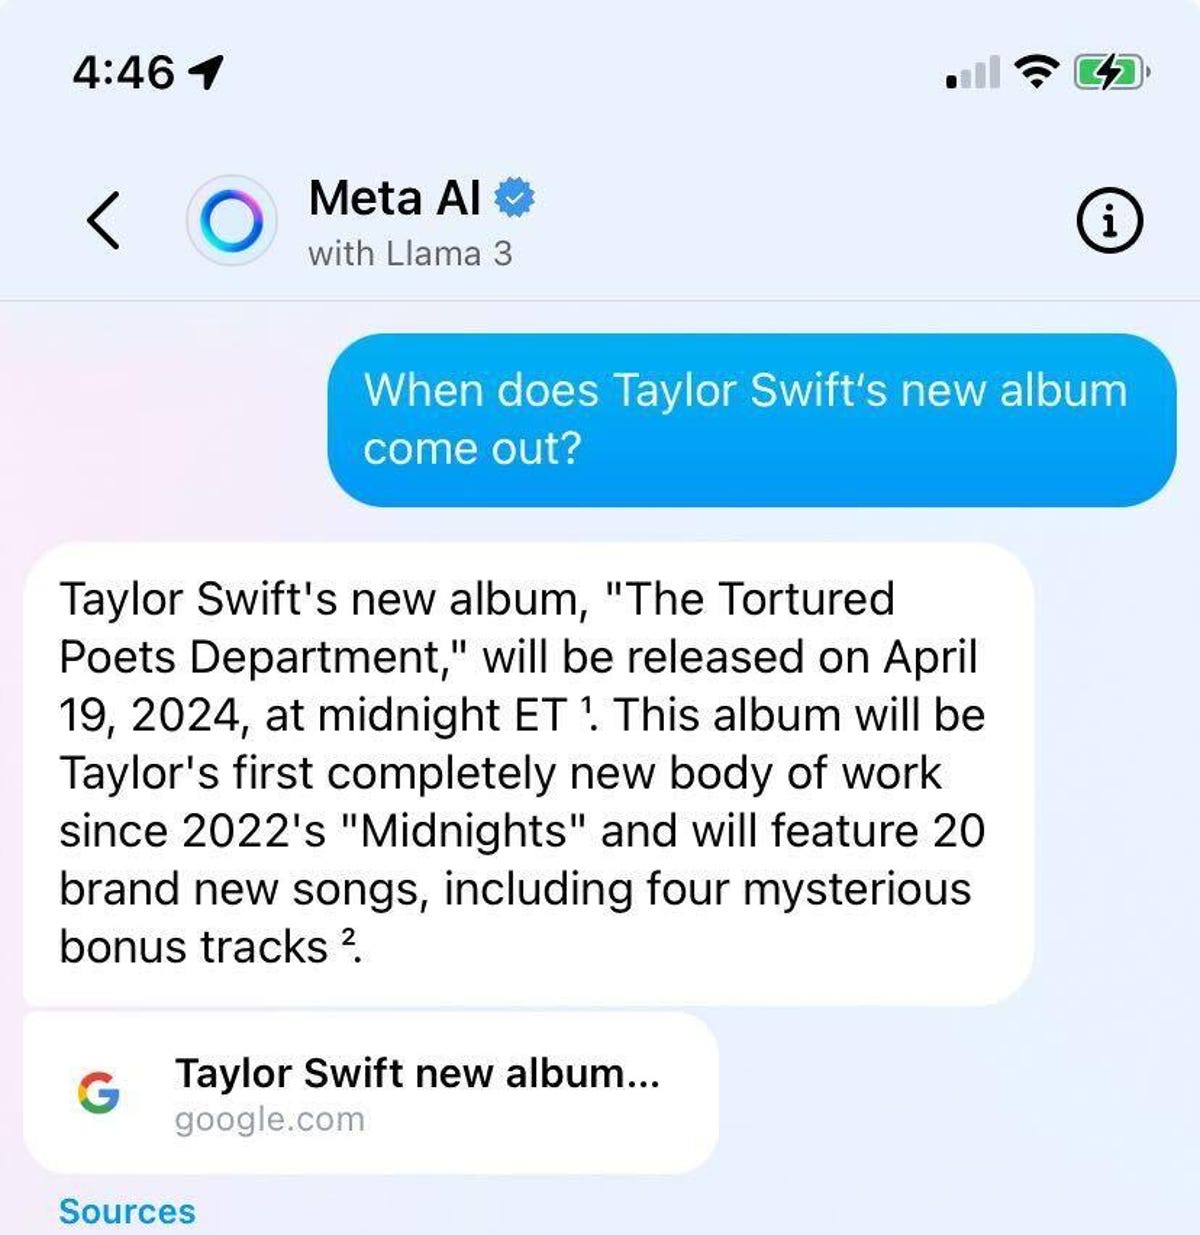 Screenshot of Meta AI responding to prompt about Taylor Swift